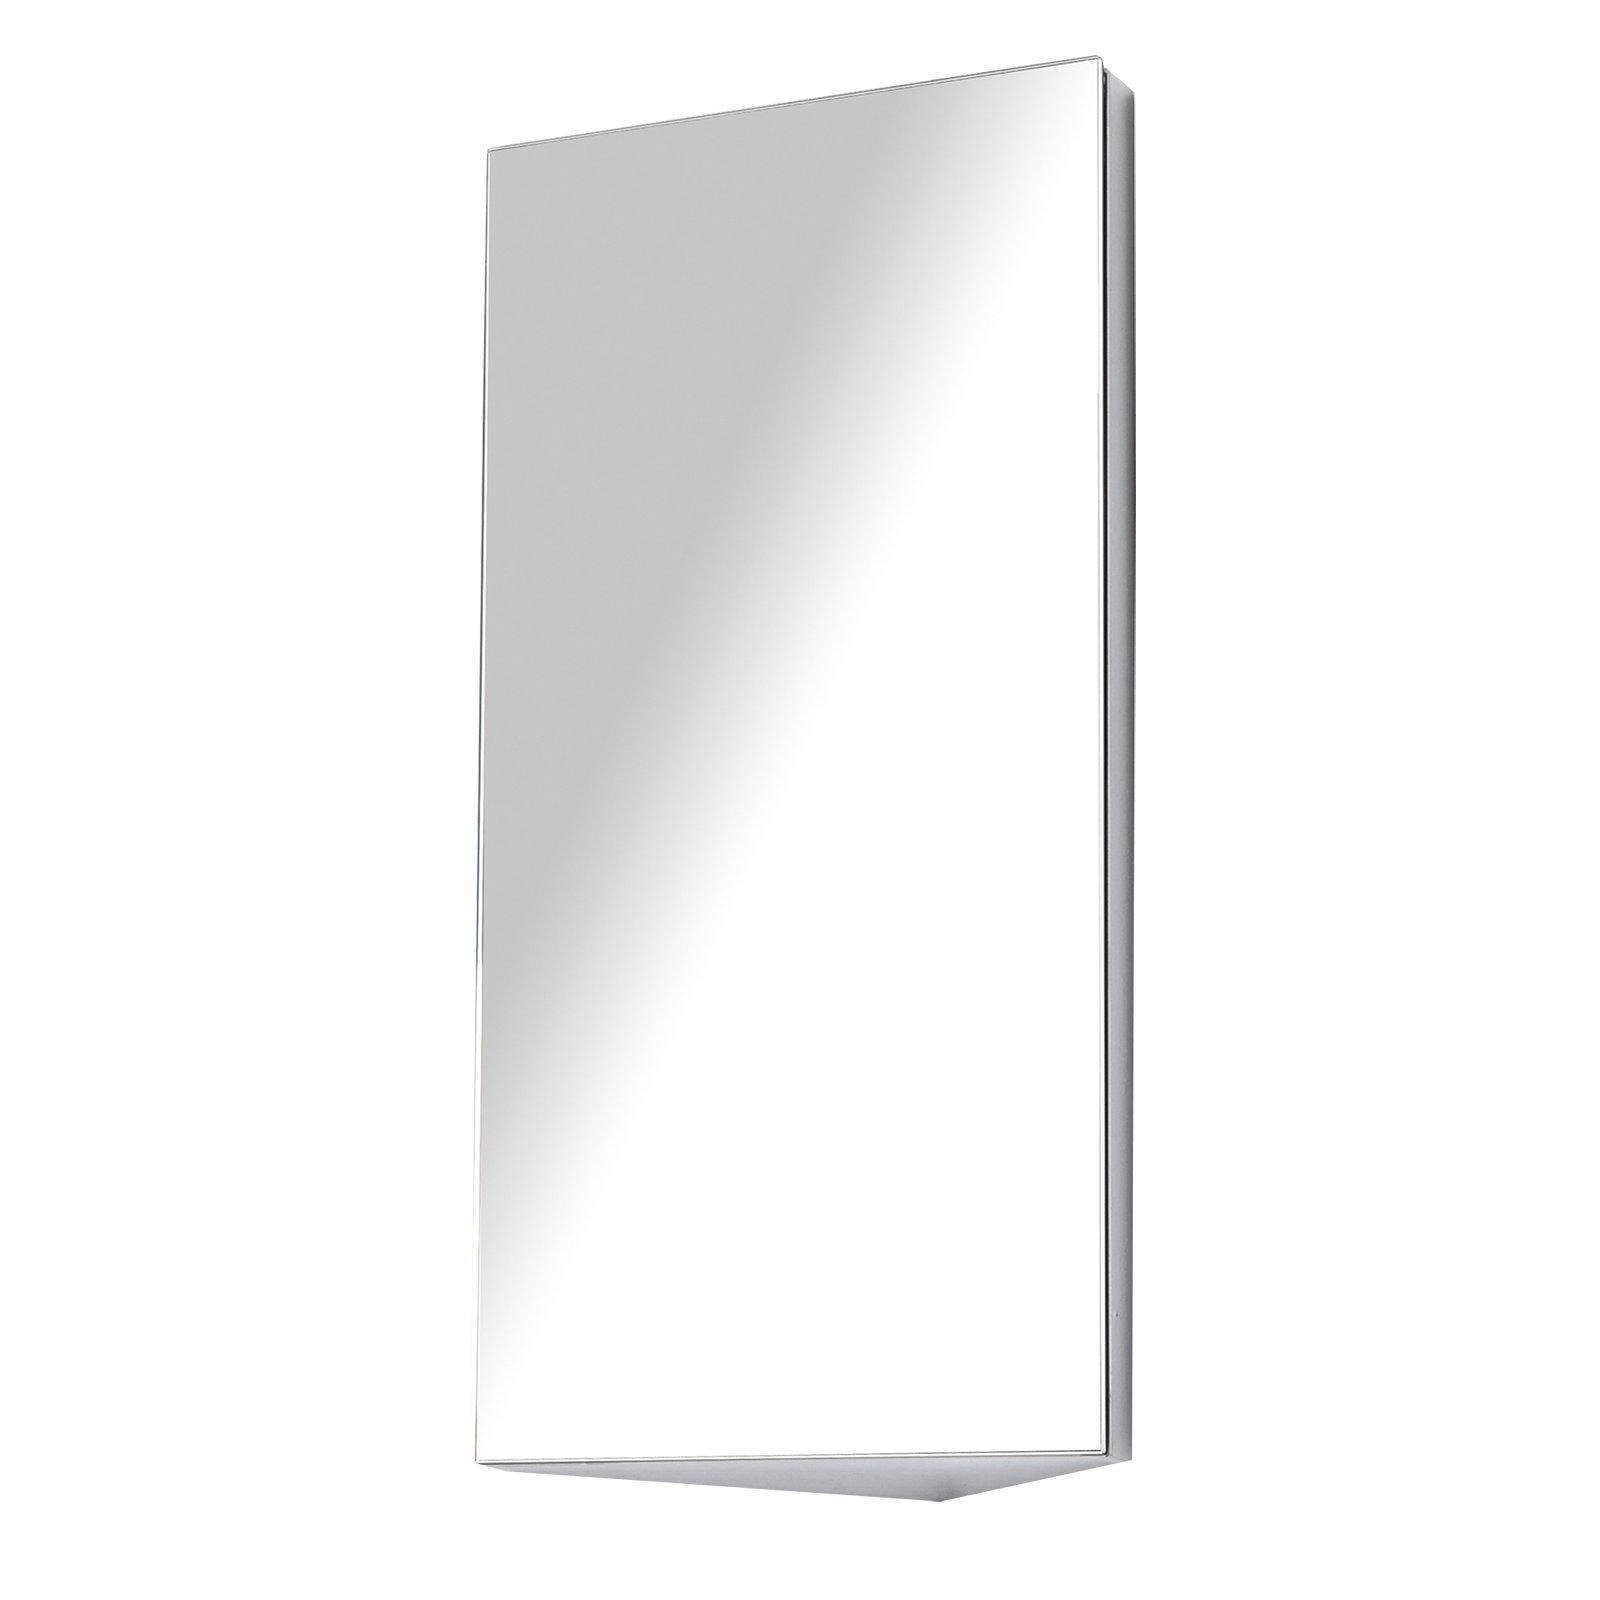 Wall Mounted Bathroom Mirror Glass Storage Stainless Steel Cupboard - image 1